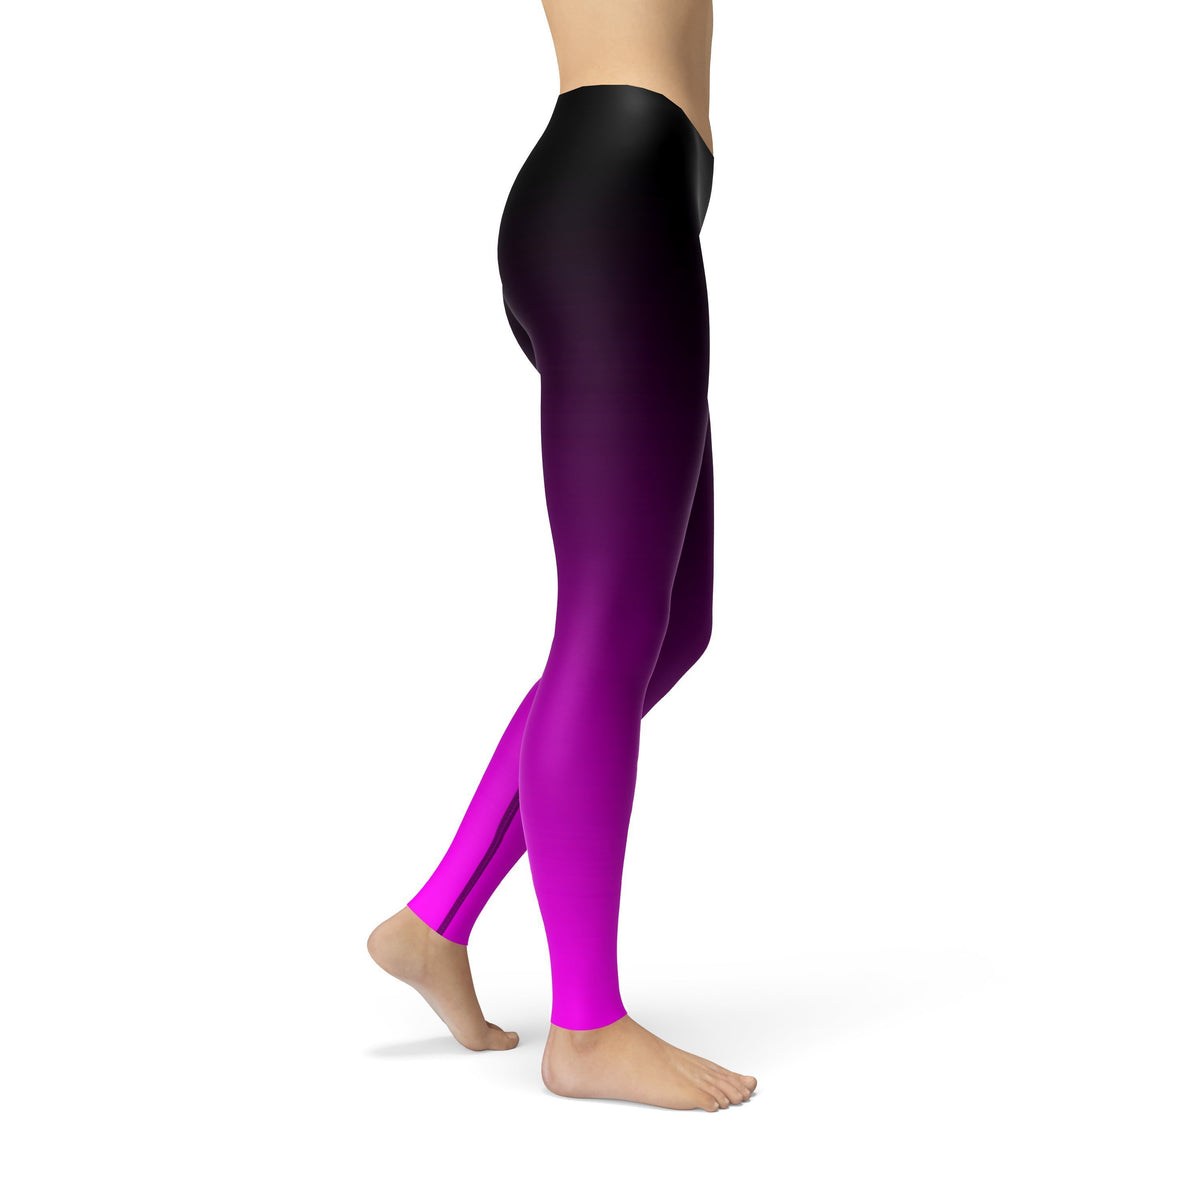 Ombre Tights Hot Pink Black dark Purple, Christmas Gift for Women